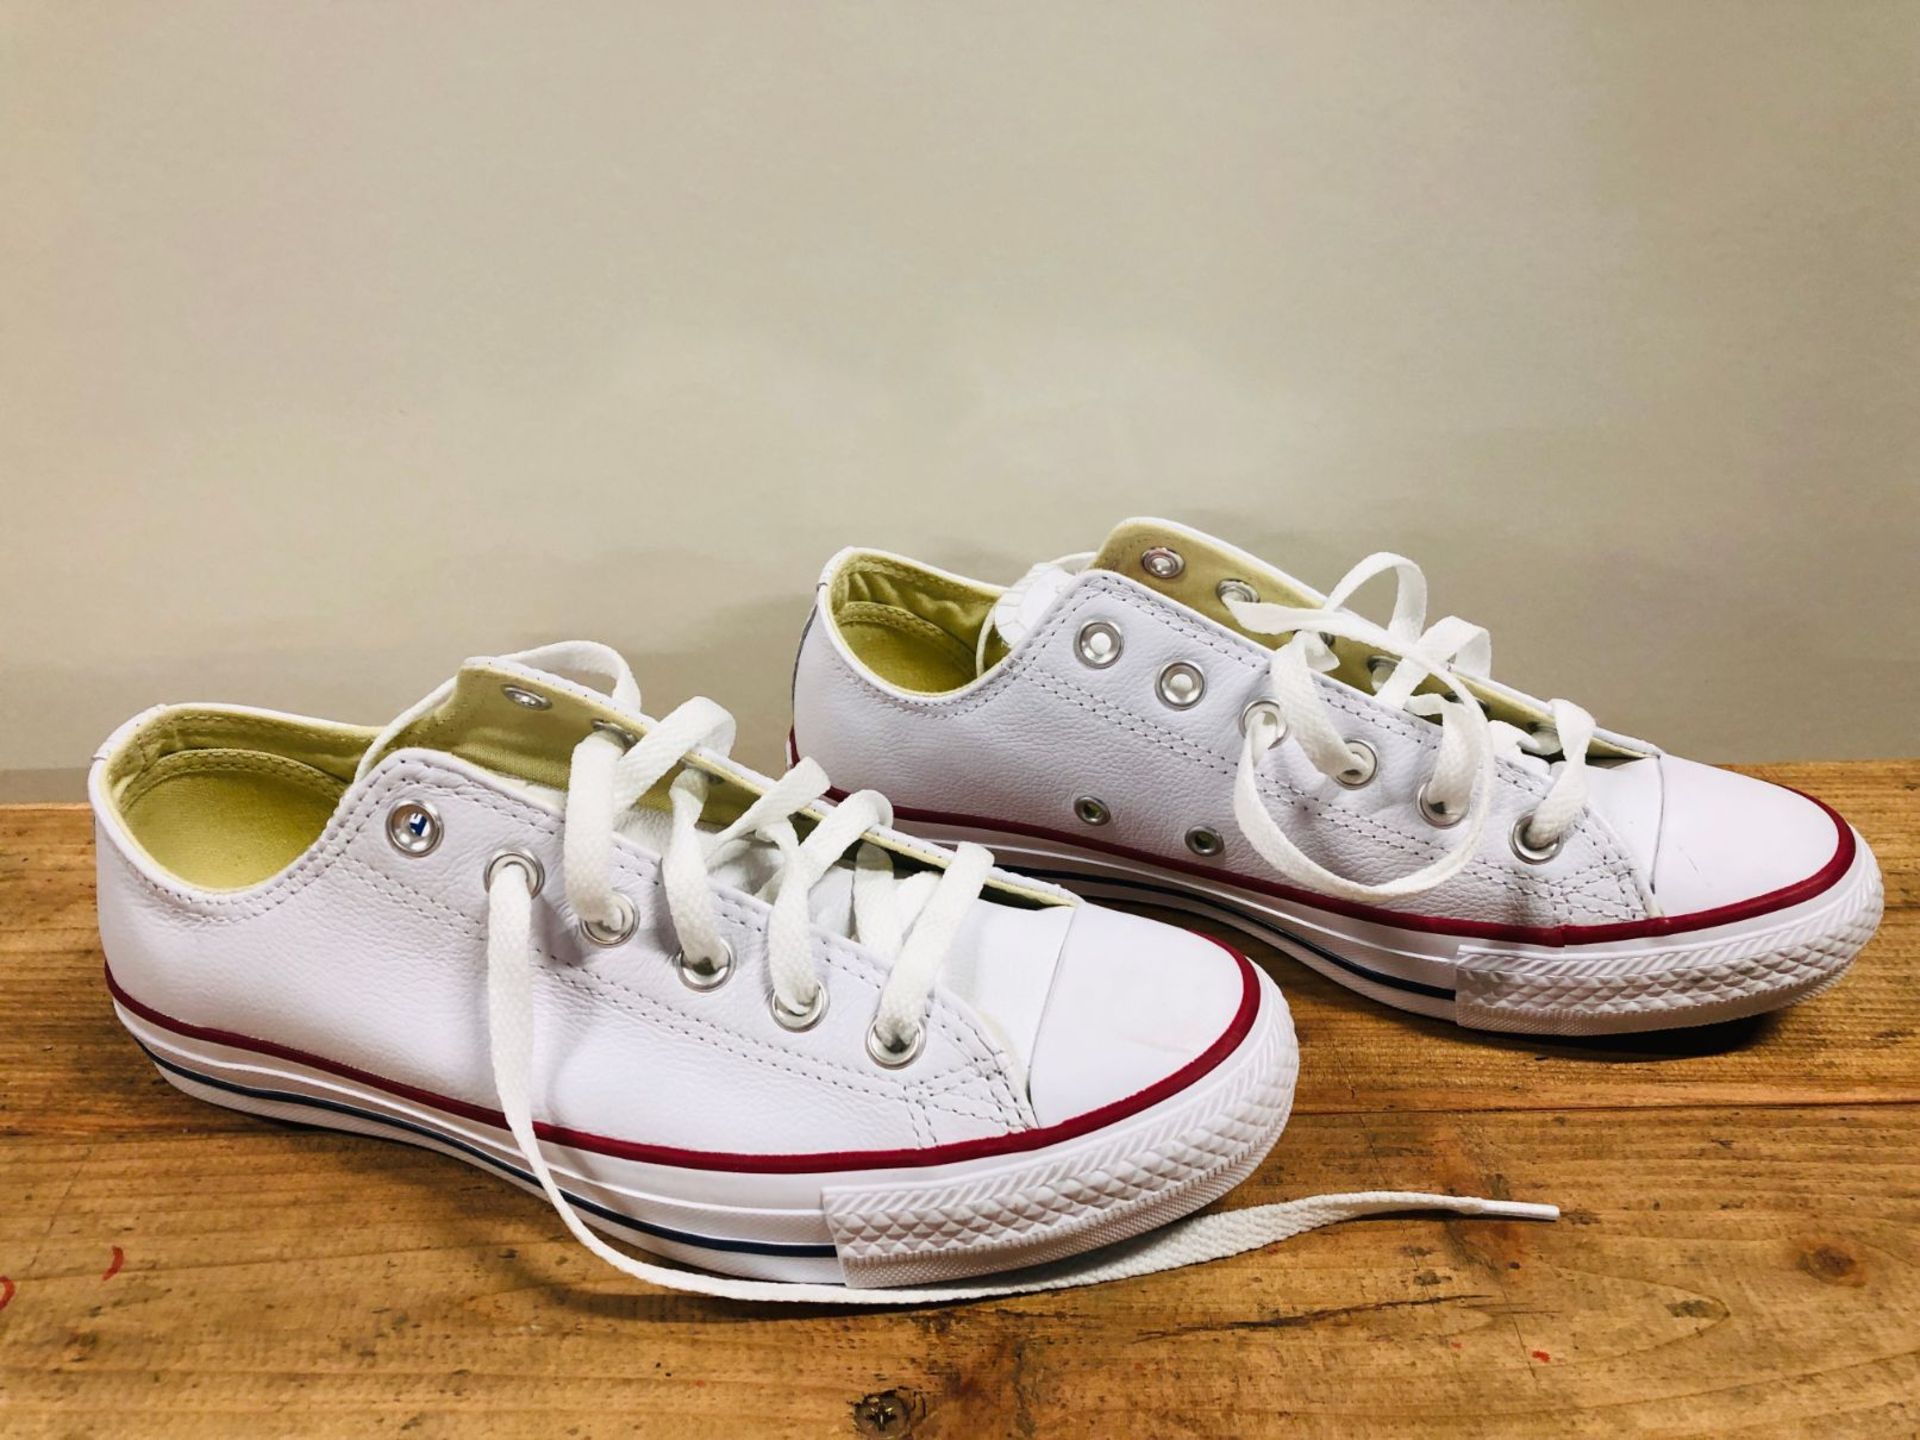 1 X PAIR OF UNISEX CONVERSE CHUCK TAYLOR ALL STAR OX LEATHER LOW TOP TRAINERS / SIZE: UK (MENS - 8)